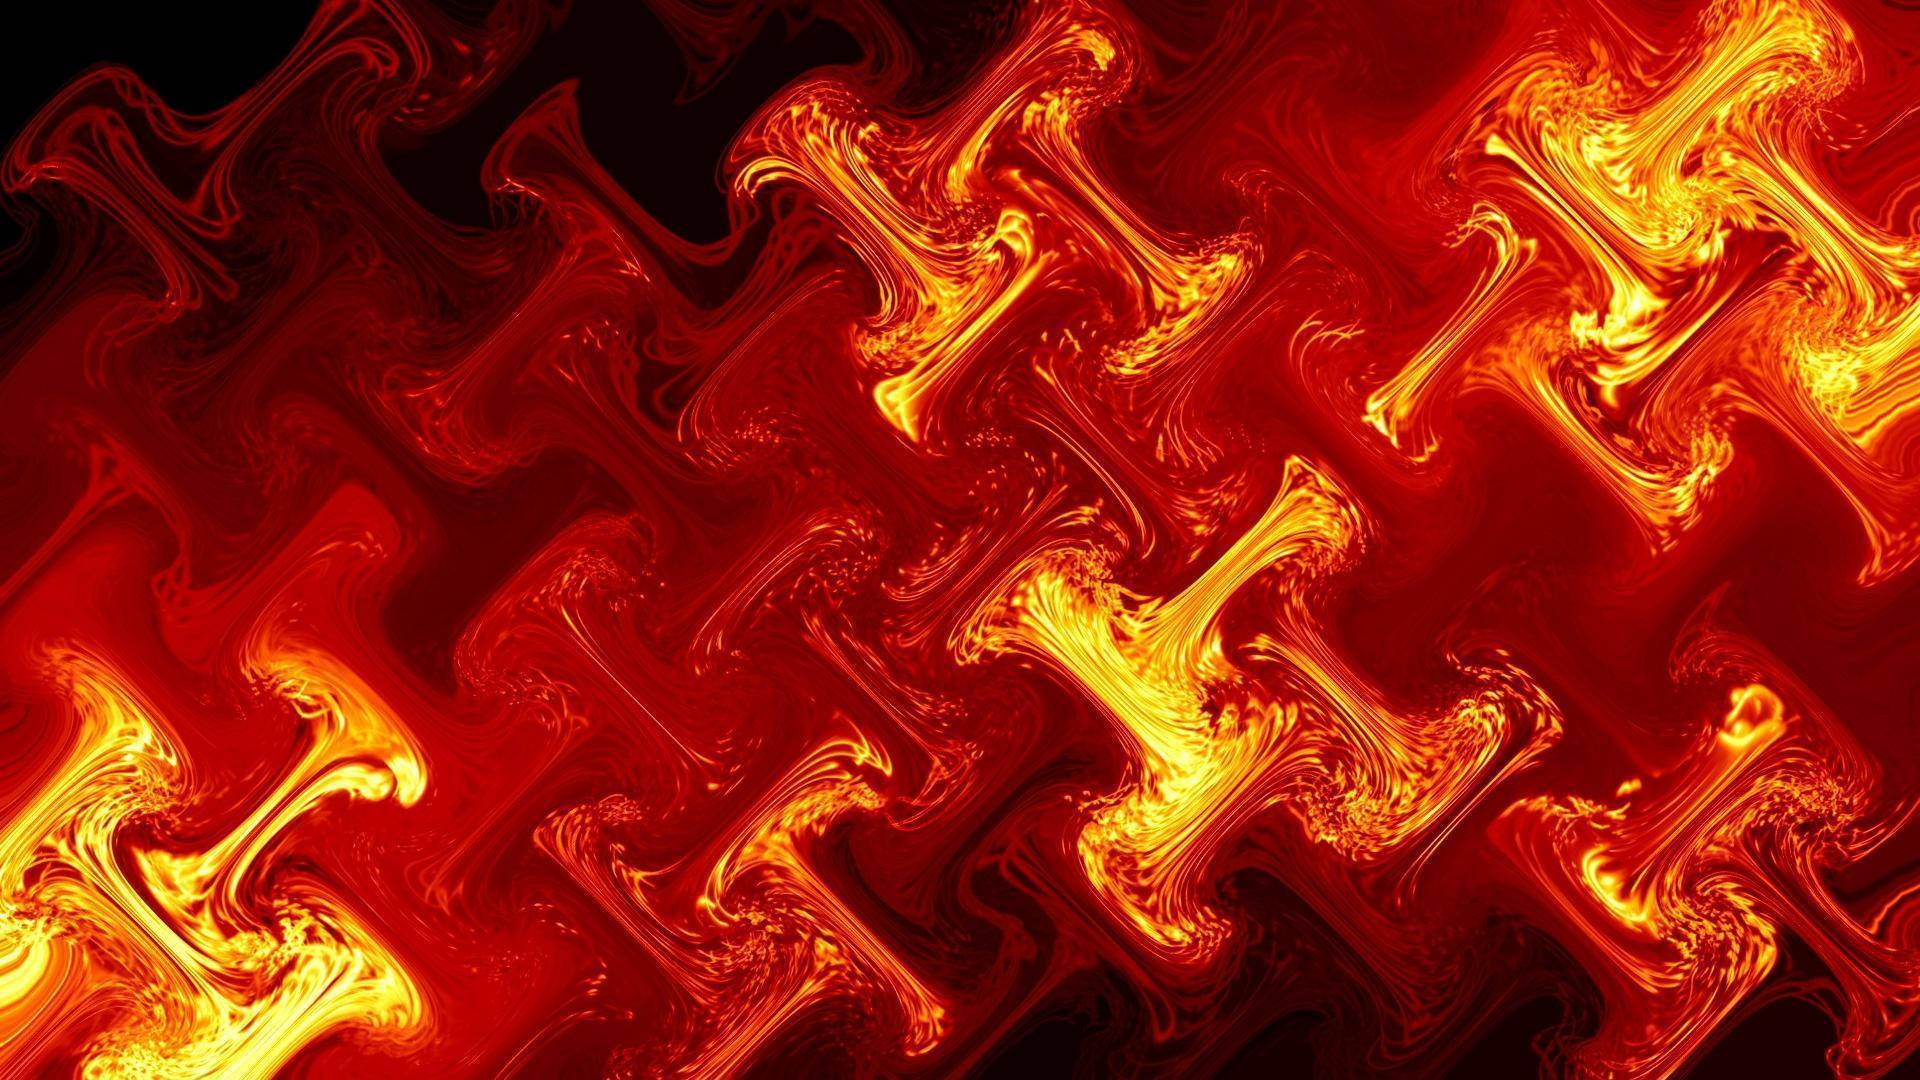 Red Fire With Swastika Patterns Wallpaper